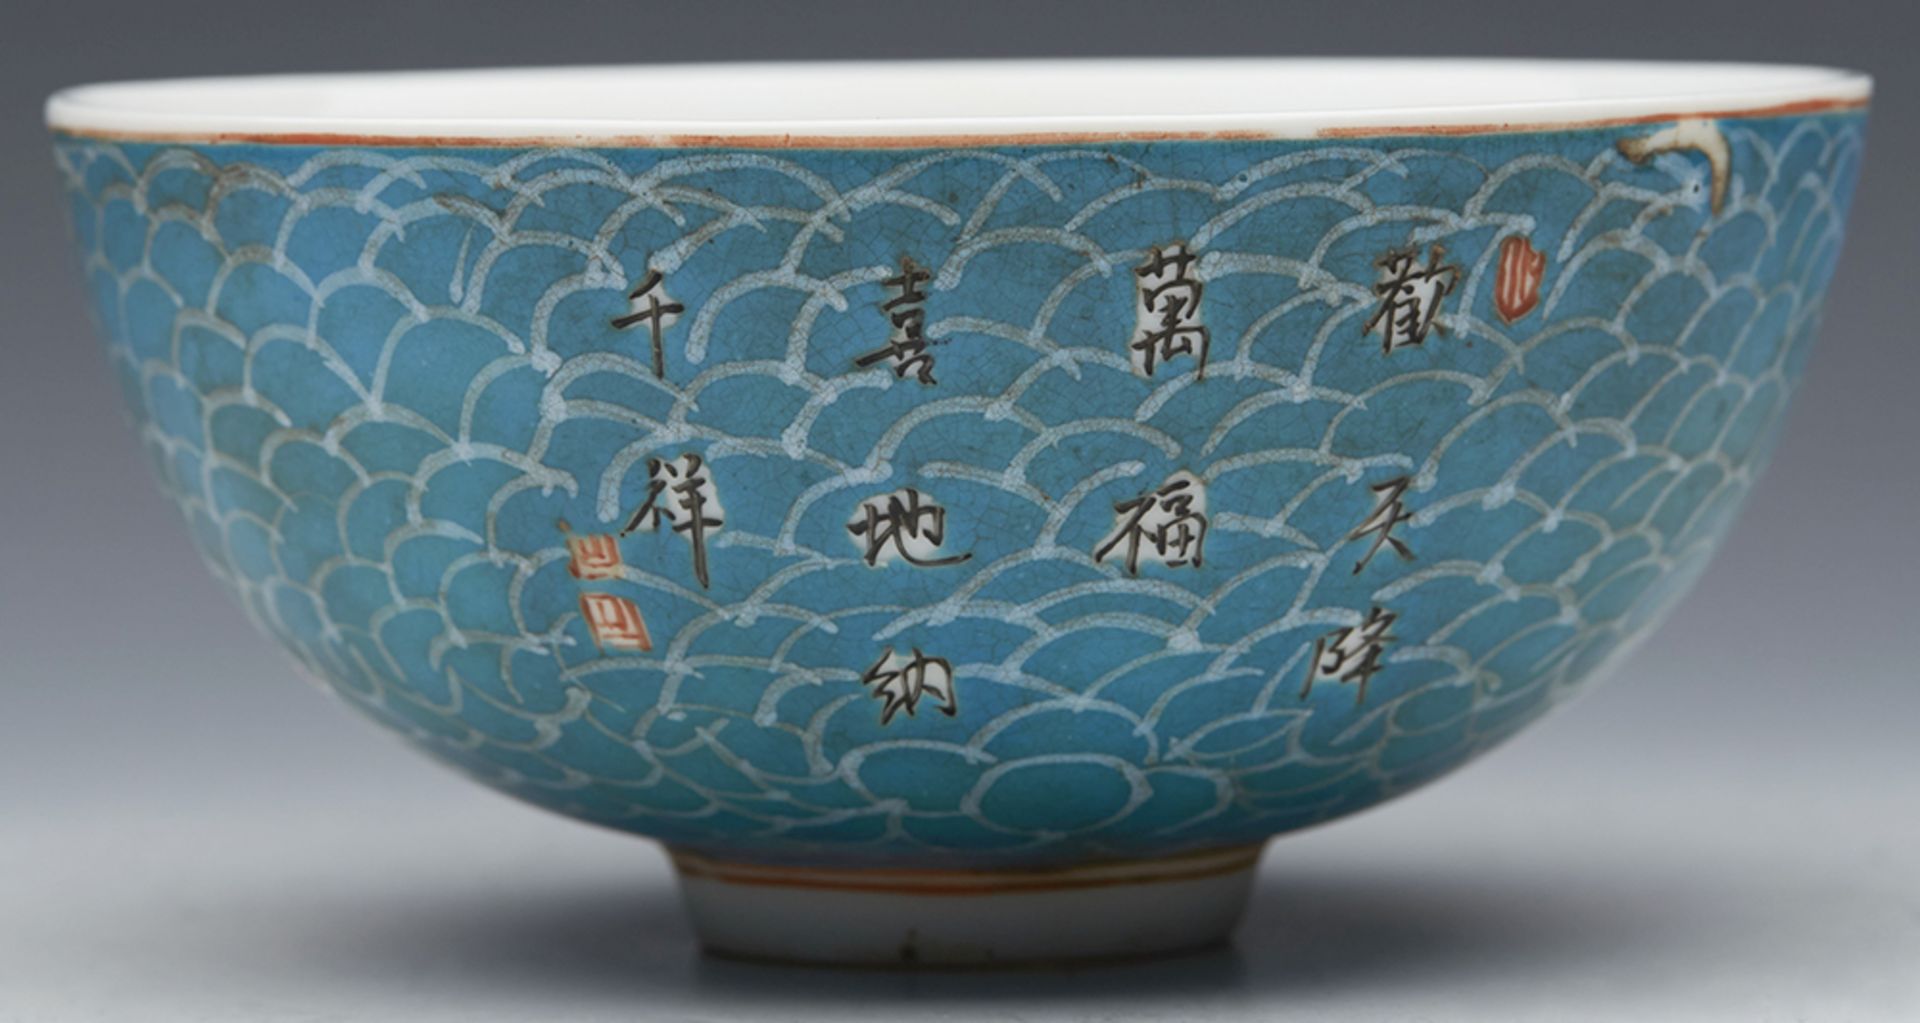 Superb Antique Chinese Qianlong Mark Figural Bowl 19/20th C. - Image 9 of 9